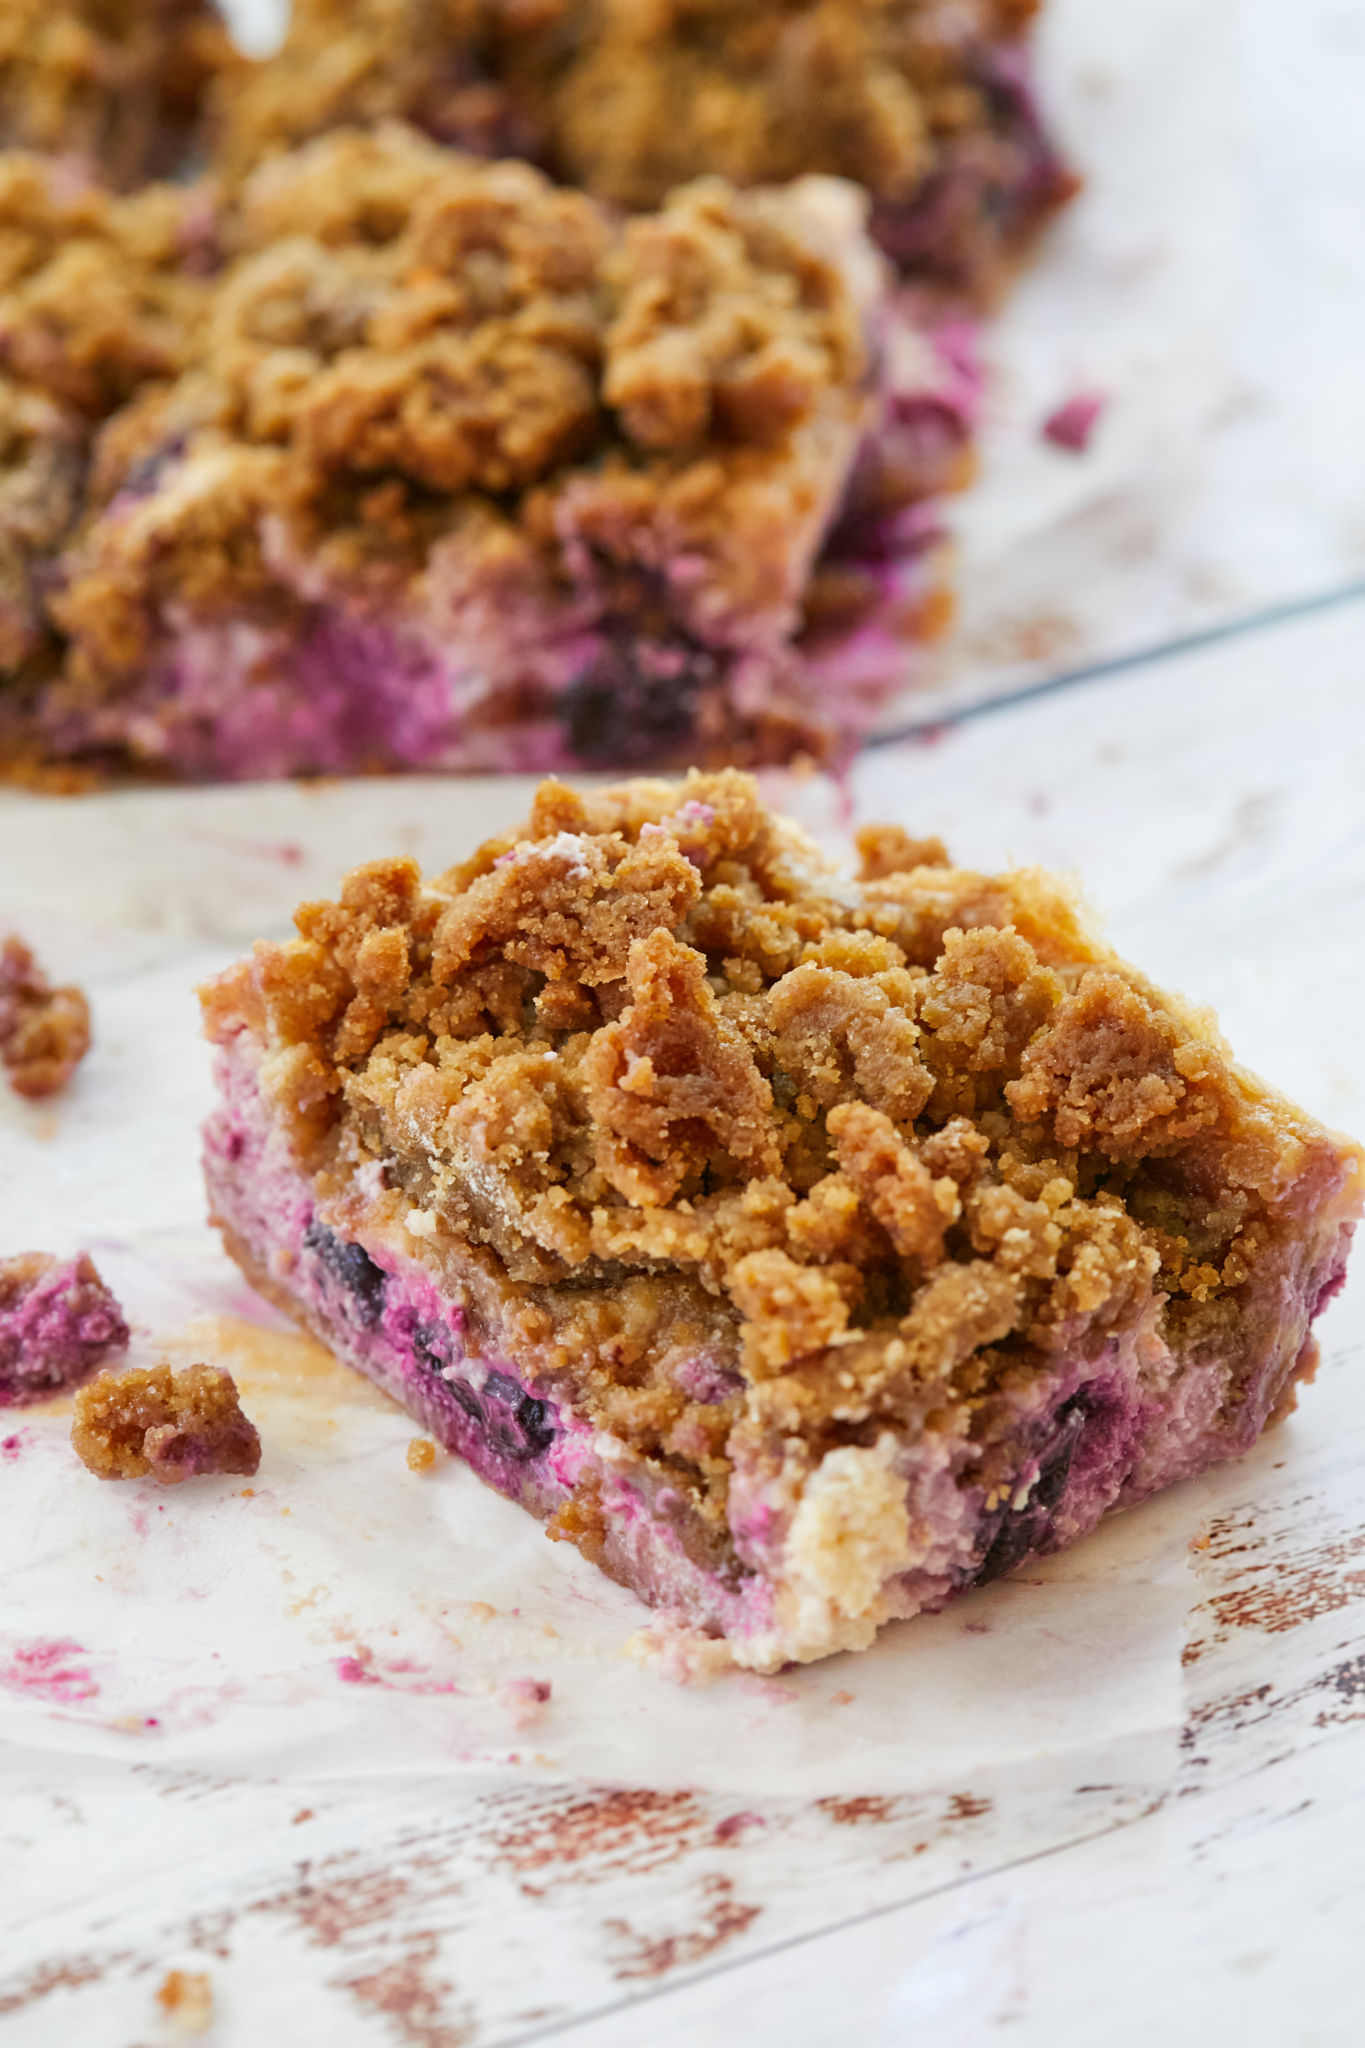 A square of Lemon and Blueberry cheesecake is cut off the whole cake that's behind it. It has gorgeous 3 ayers with crumbly buttery graham cracker crust at the bottom, sweet, tangy and creamy filling in the middle loaded with fruity and floral juicy blueberries, topped with crispy indulgent crumble topping.